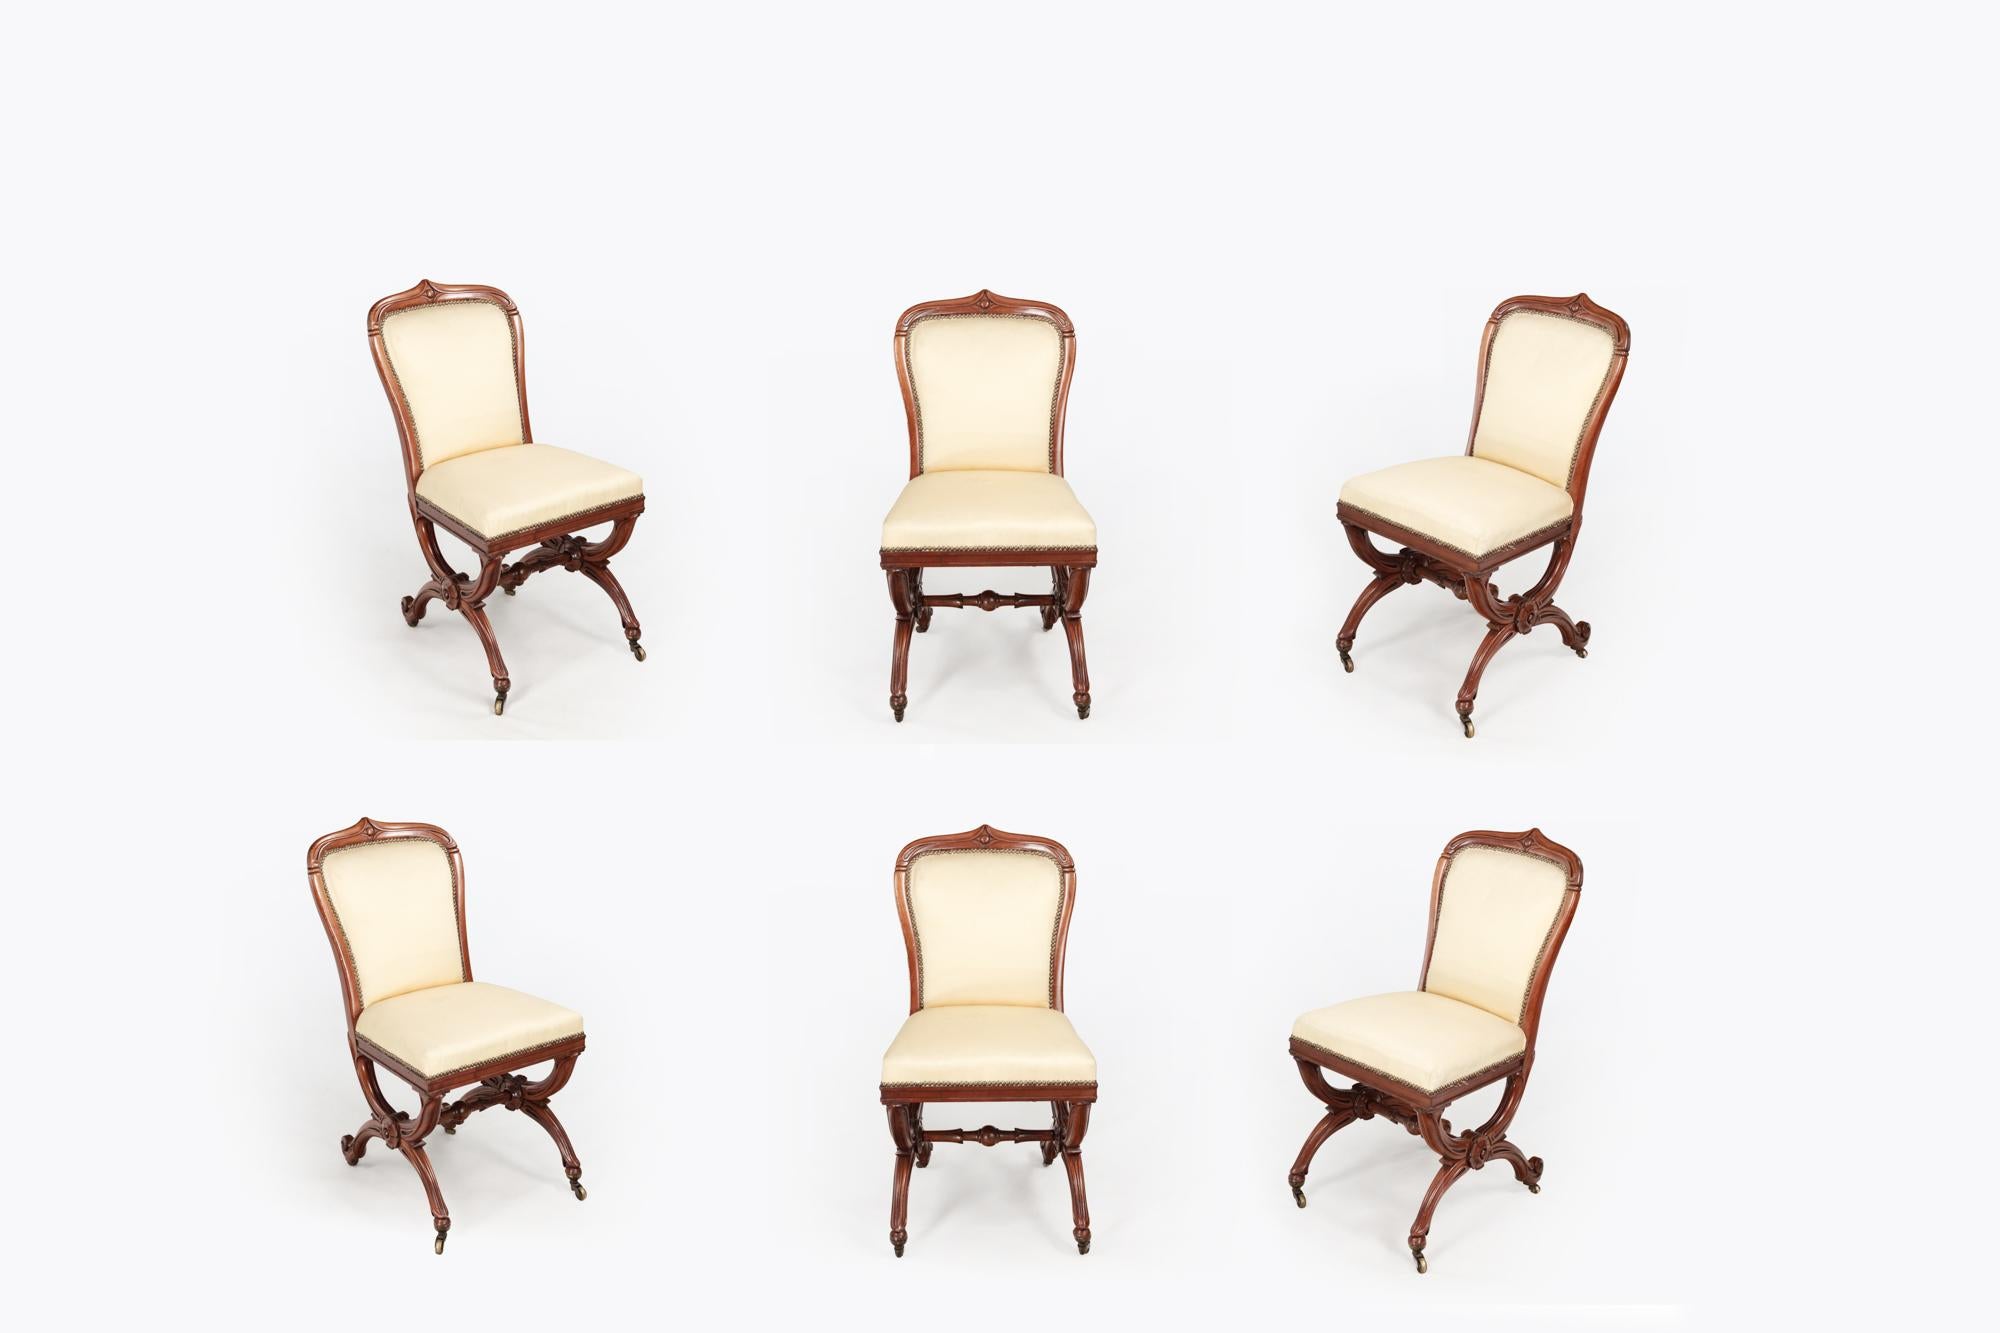 19th Century set of six dining chairs with X-shaped mahogany frames and padded backs. Central carved rose detail to the X-frame legs joined by a molded spacers terminating with scolled feet on simple brass castors. Stamped with the mark 